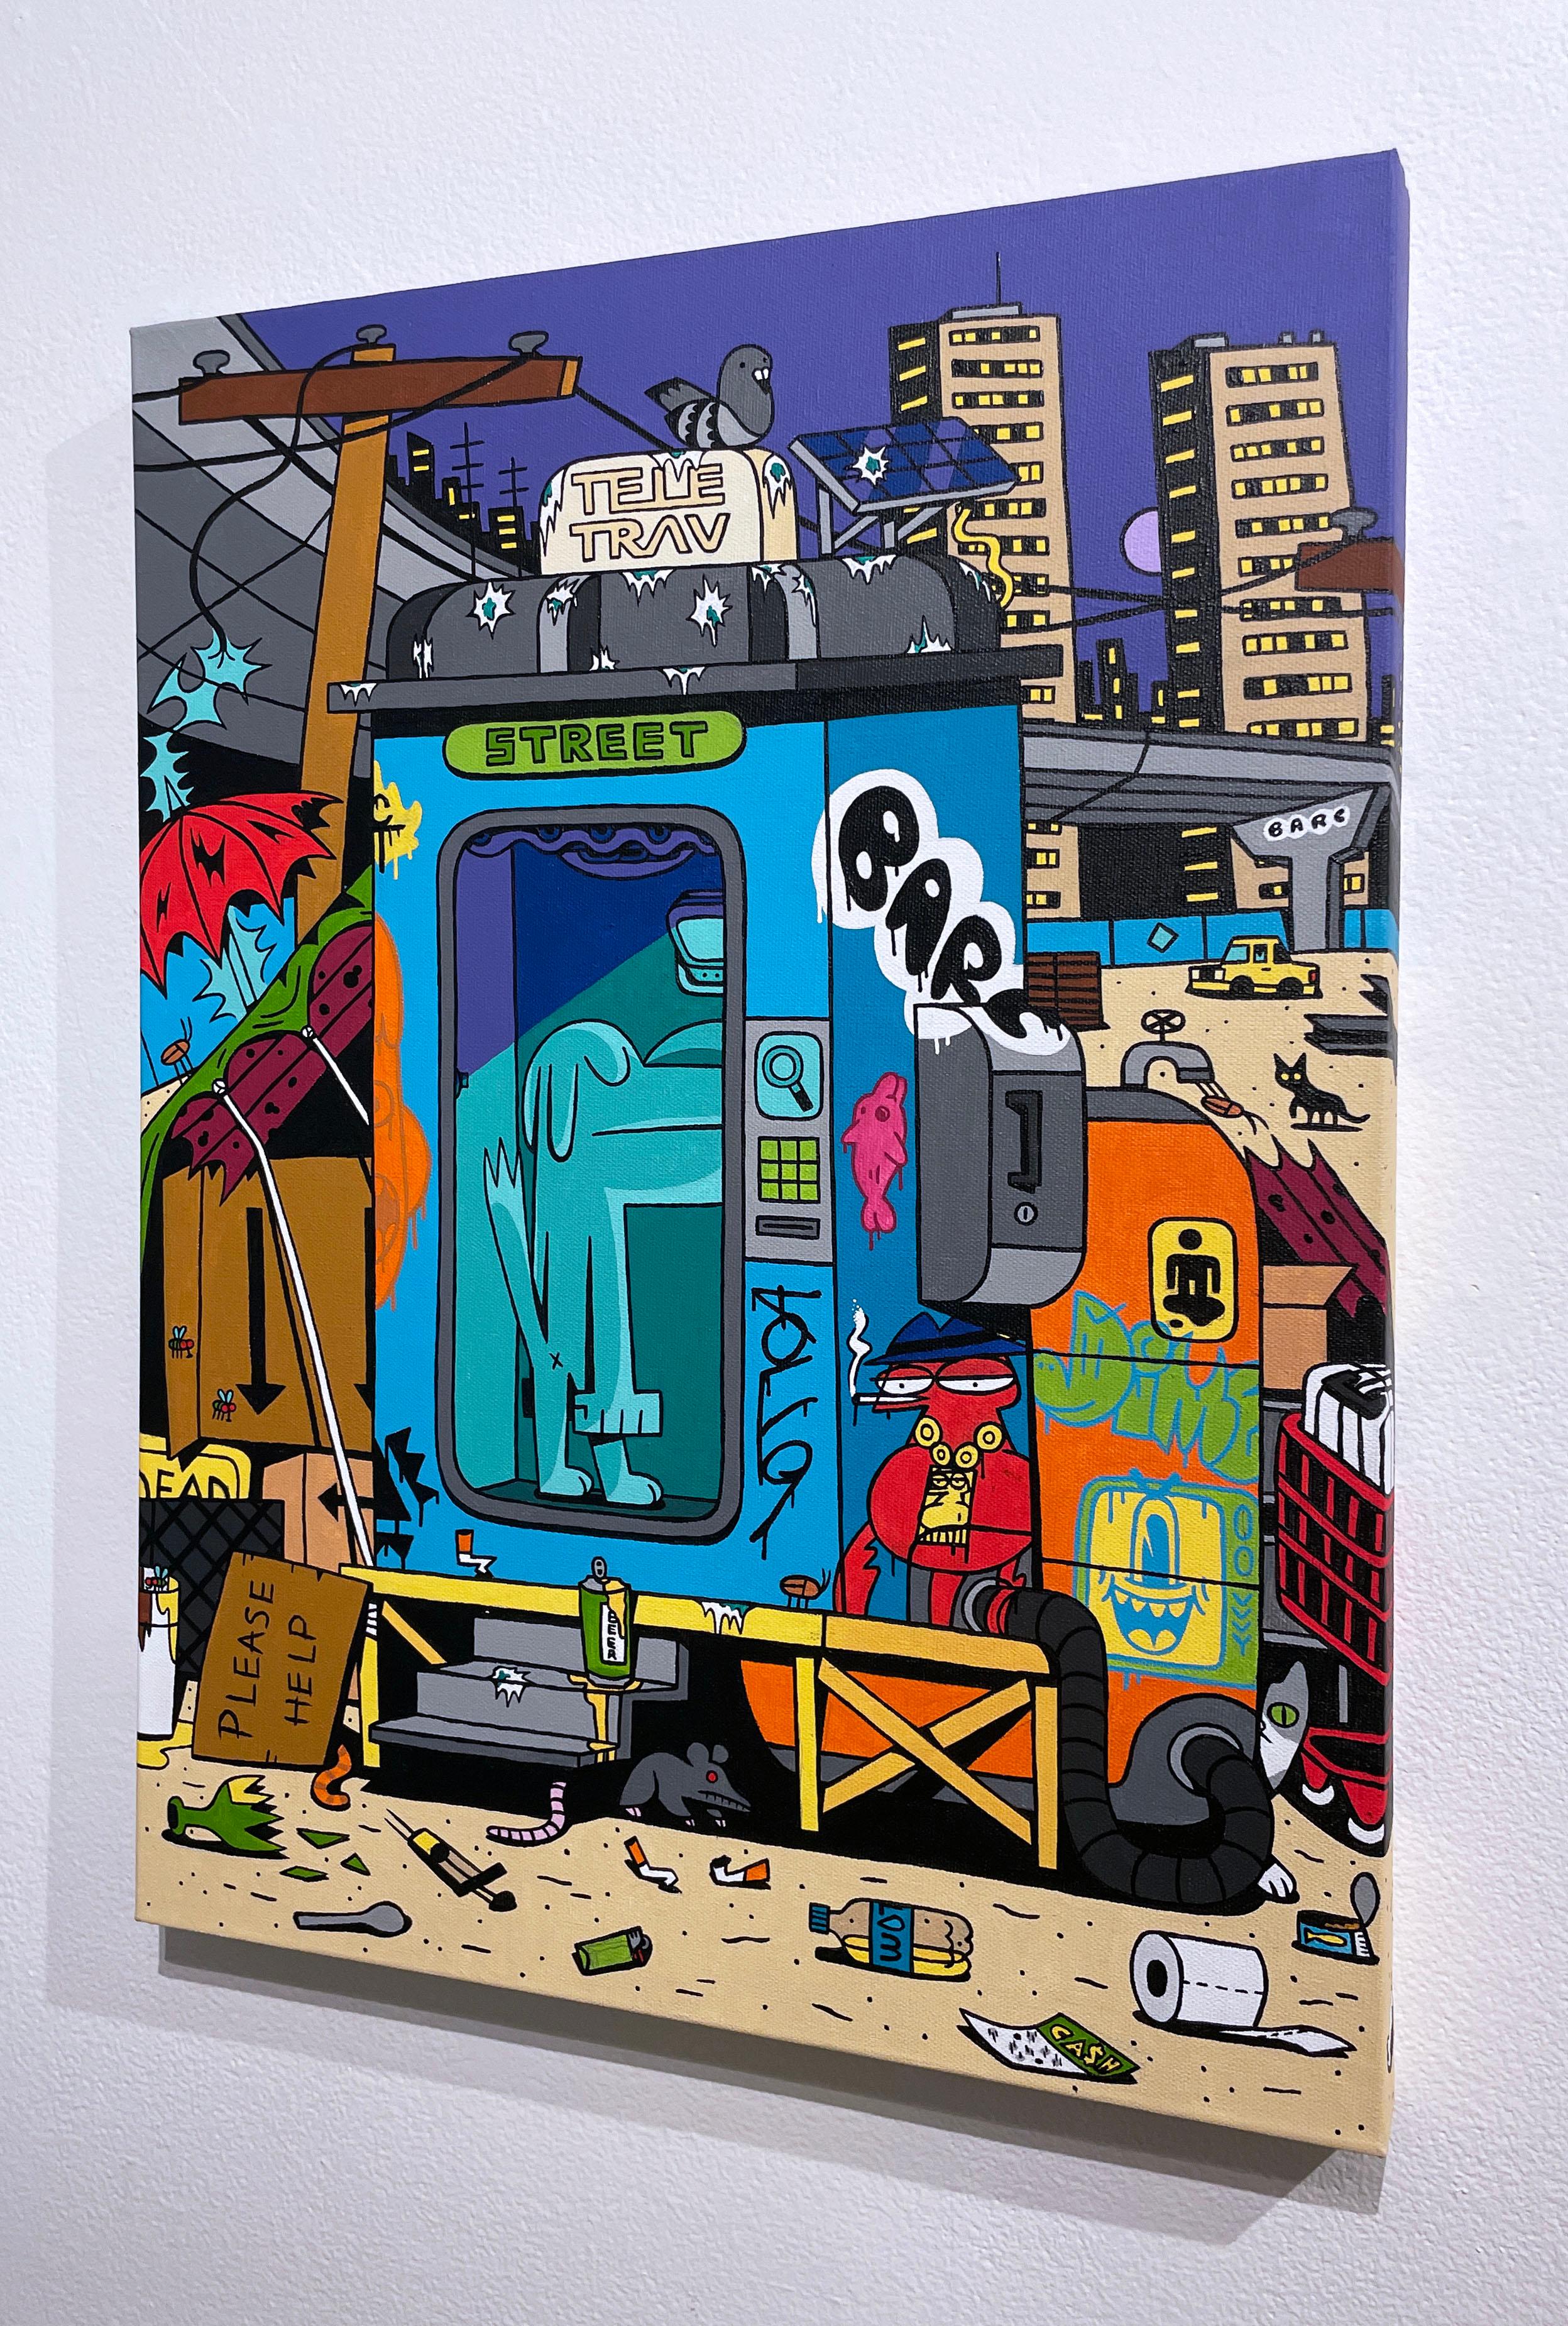 Tele-Trav (Street) by BARC the dog (2022), pop art comic book style, acrylic on canvas, illustration, cartoon inspired character art, cityscape, urban scene, under the bridge, buildings, teleportation machine

Welcome to the world BARC the dog. In